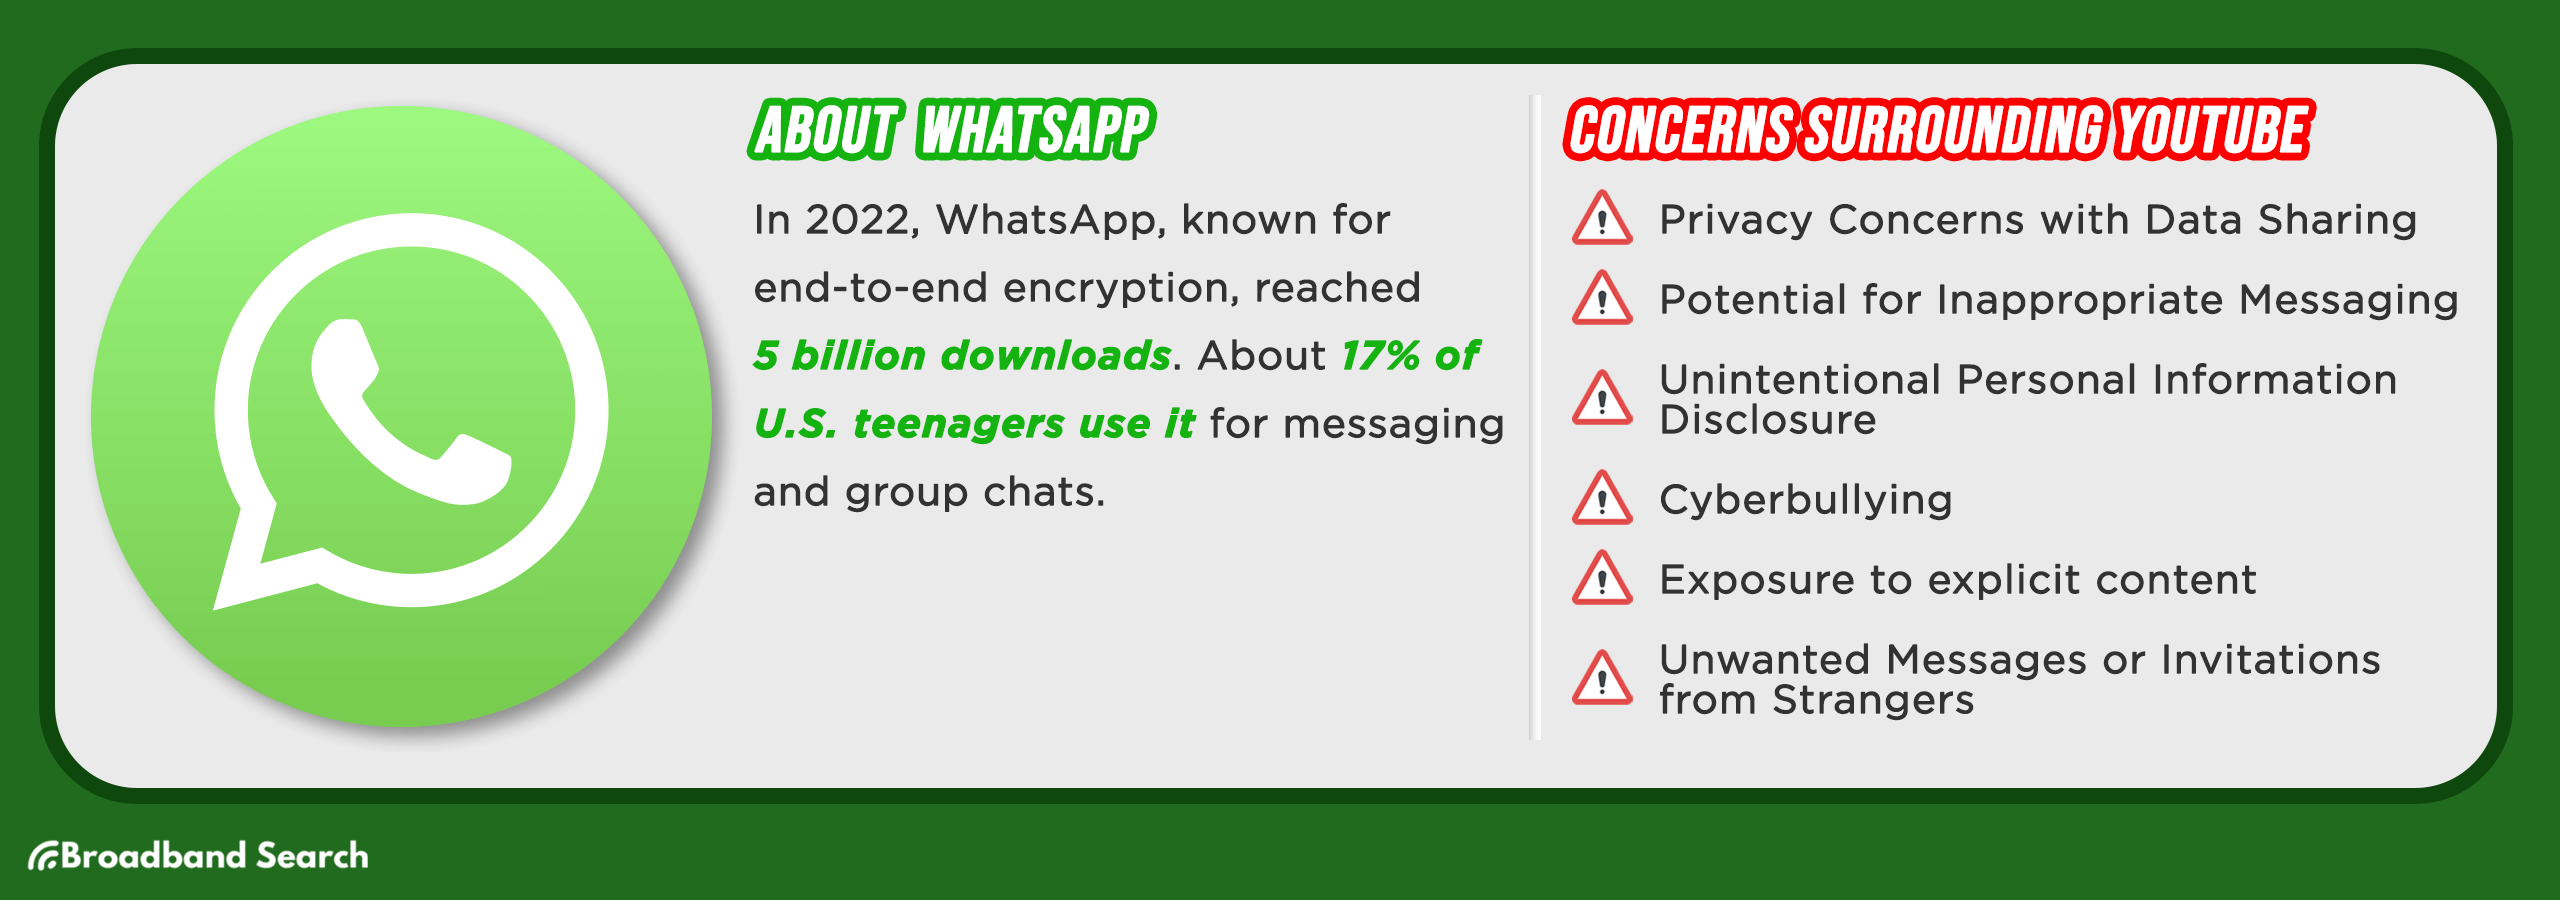 Statistics on Whatsapp and concerns surrounding usage of the social media app